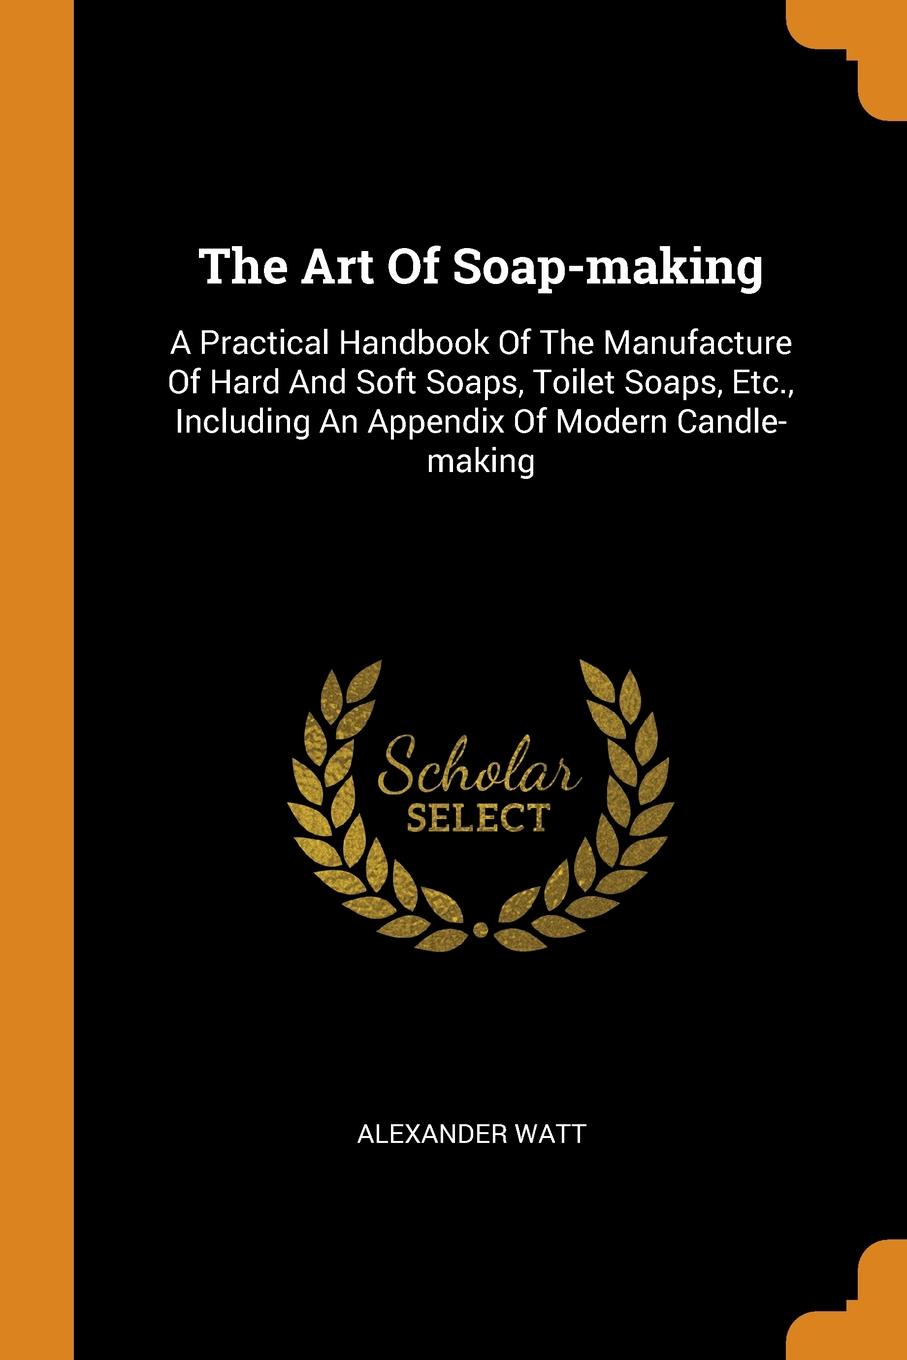 The Art Of Soap-making. A Practical Handbook Of The Manufacture Of Hard And Soft Soaps, Toilet Soaps, Etc., Including An Appendix Of Modern Candle-making